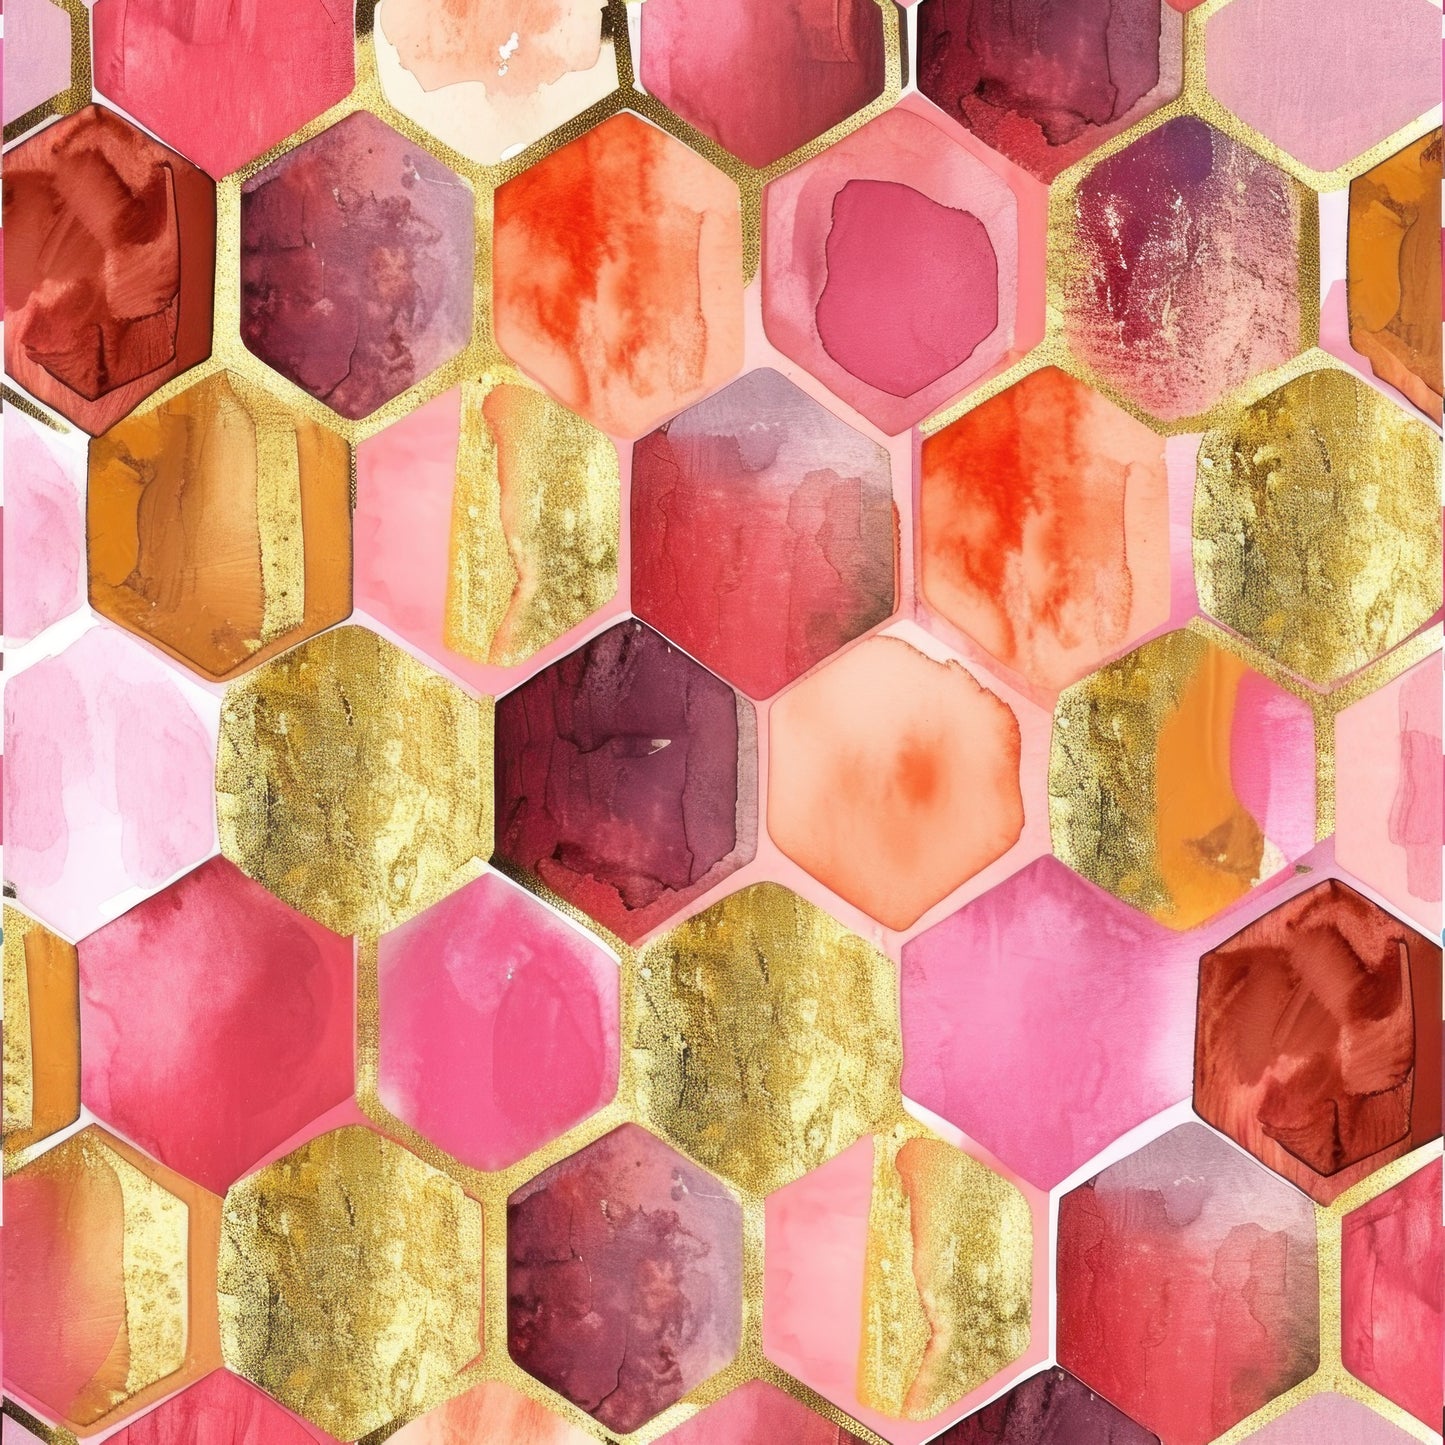 PAINTED HONEYCOMB - MULTIPLE VARIATIONS